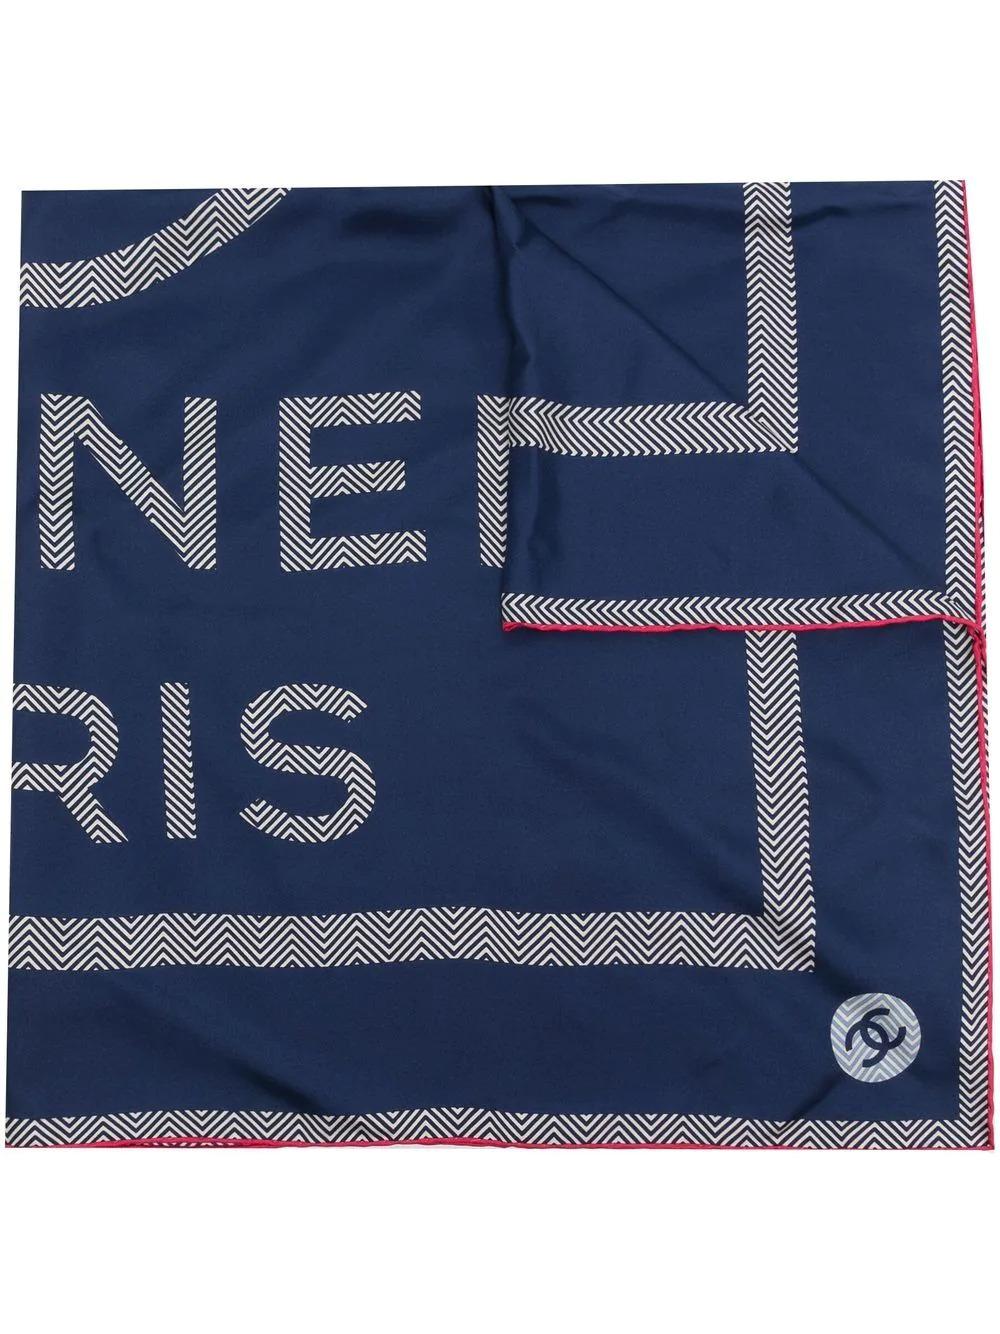 Crafted from silk, this pre-owned navy Chanel silk scarf displays the brand's signature CC logo and has been finished with a fuchsia trim detailing. Tie it around your neck or the handles of a tote.

Colour: navy/ pink

Composition:
Body (Silk